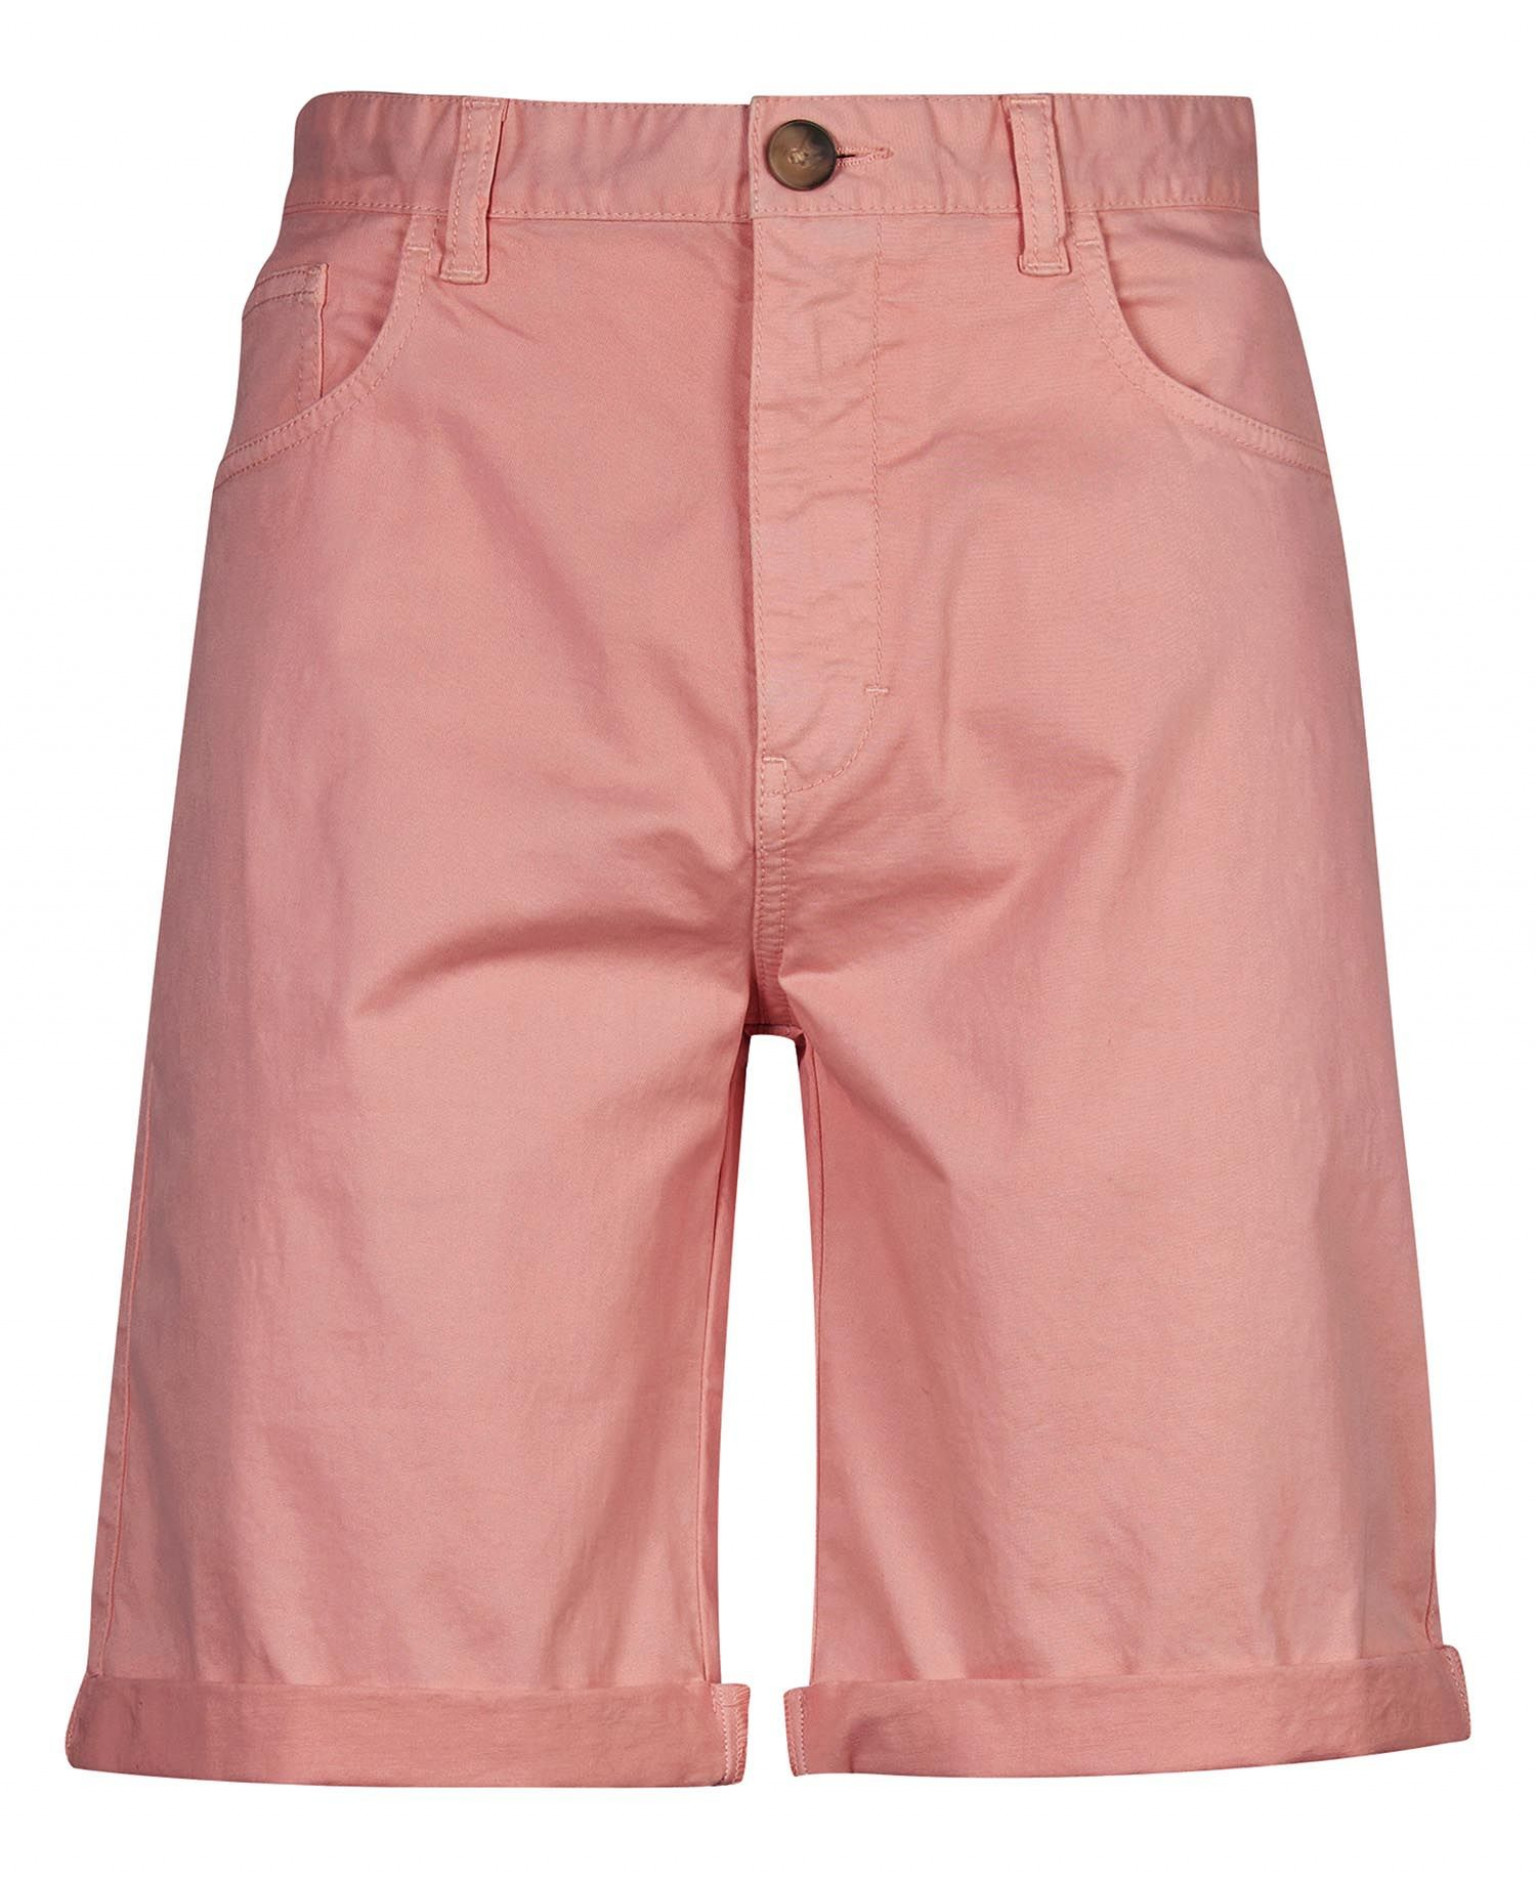 Barbour Overdyed Twill Short Pink